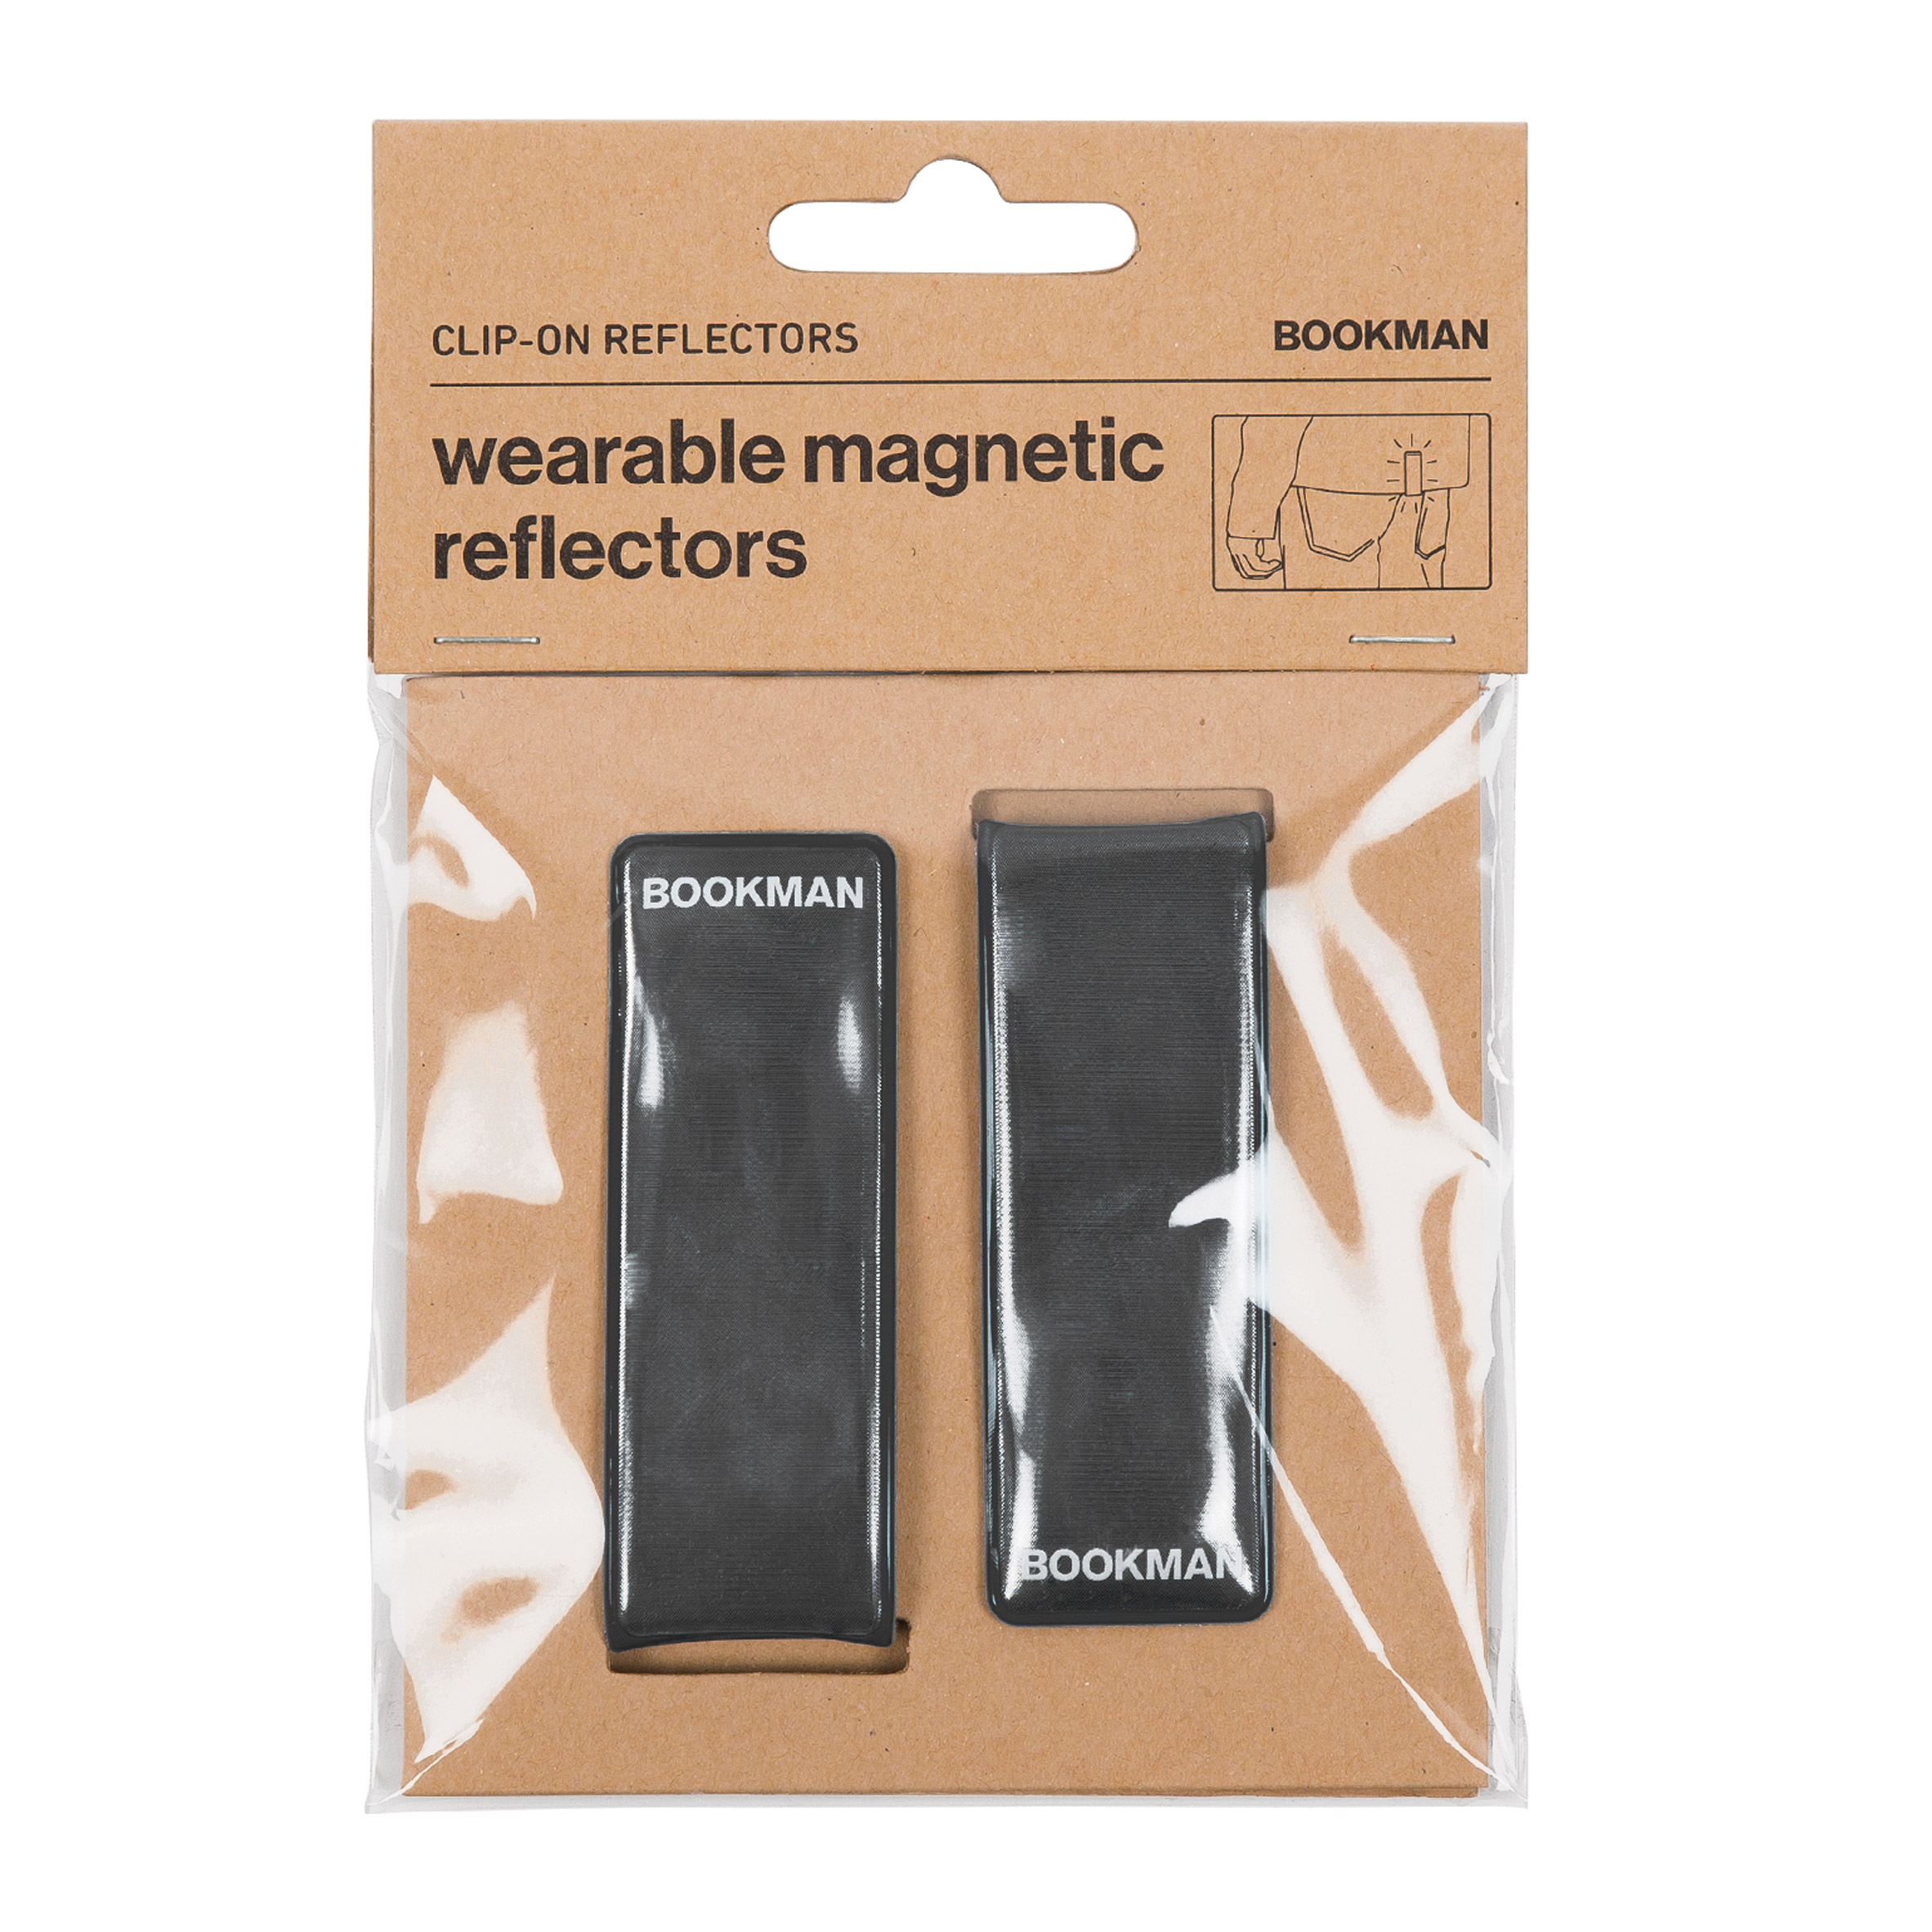 Clip-on Reflectors by Bookman